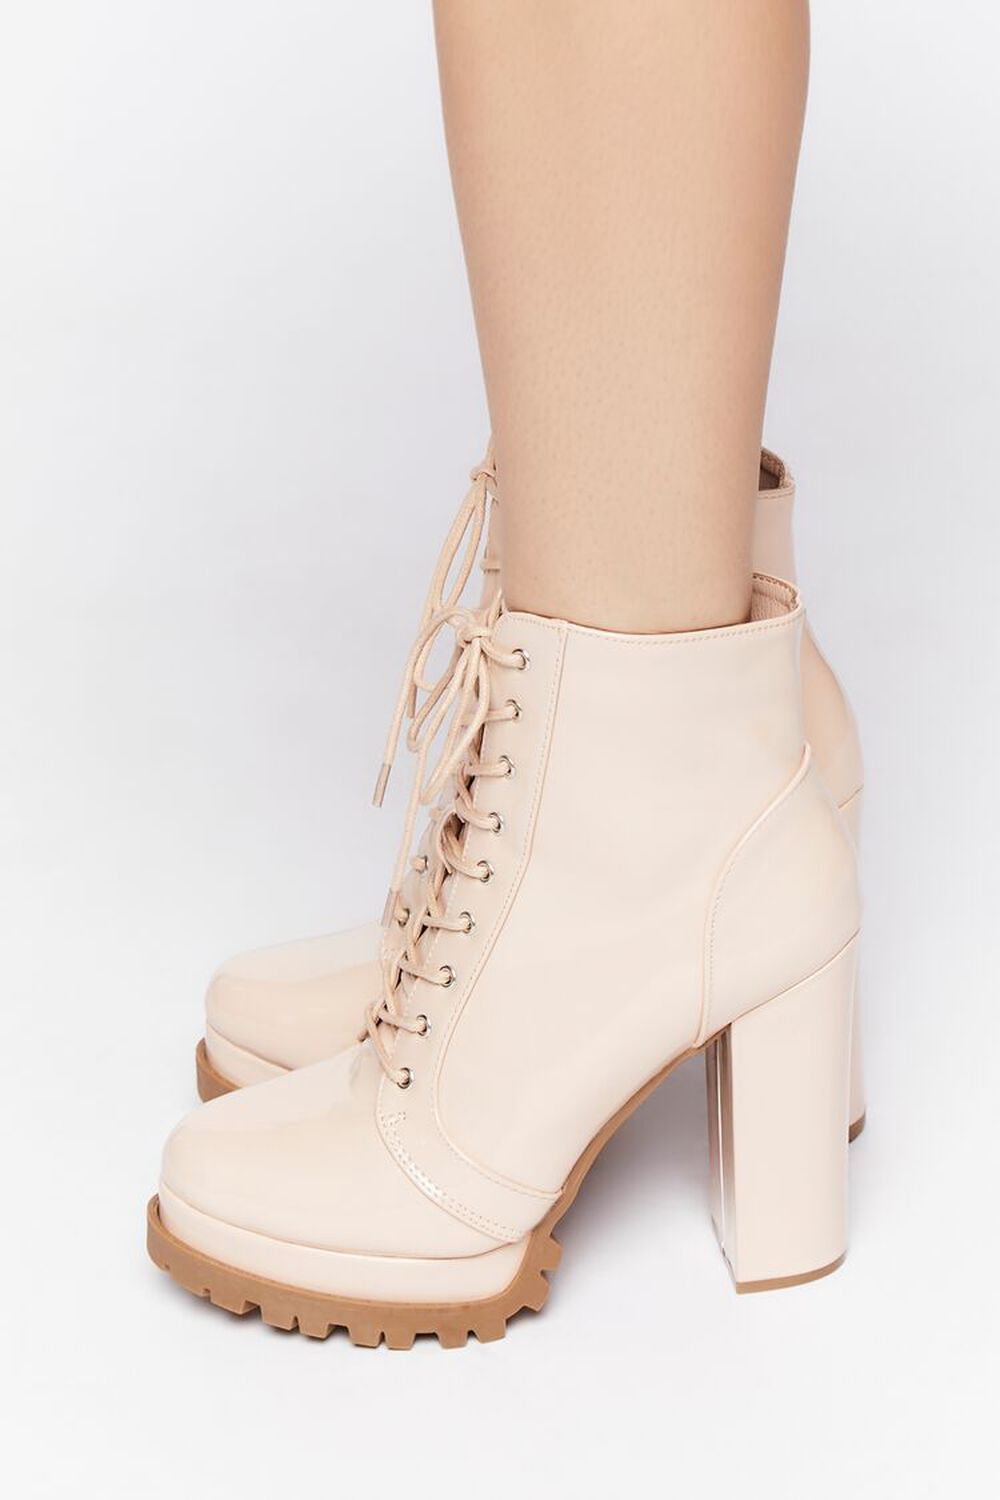 NUDE Faux Patent Leather Lace-Up Booties, image 2